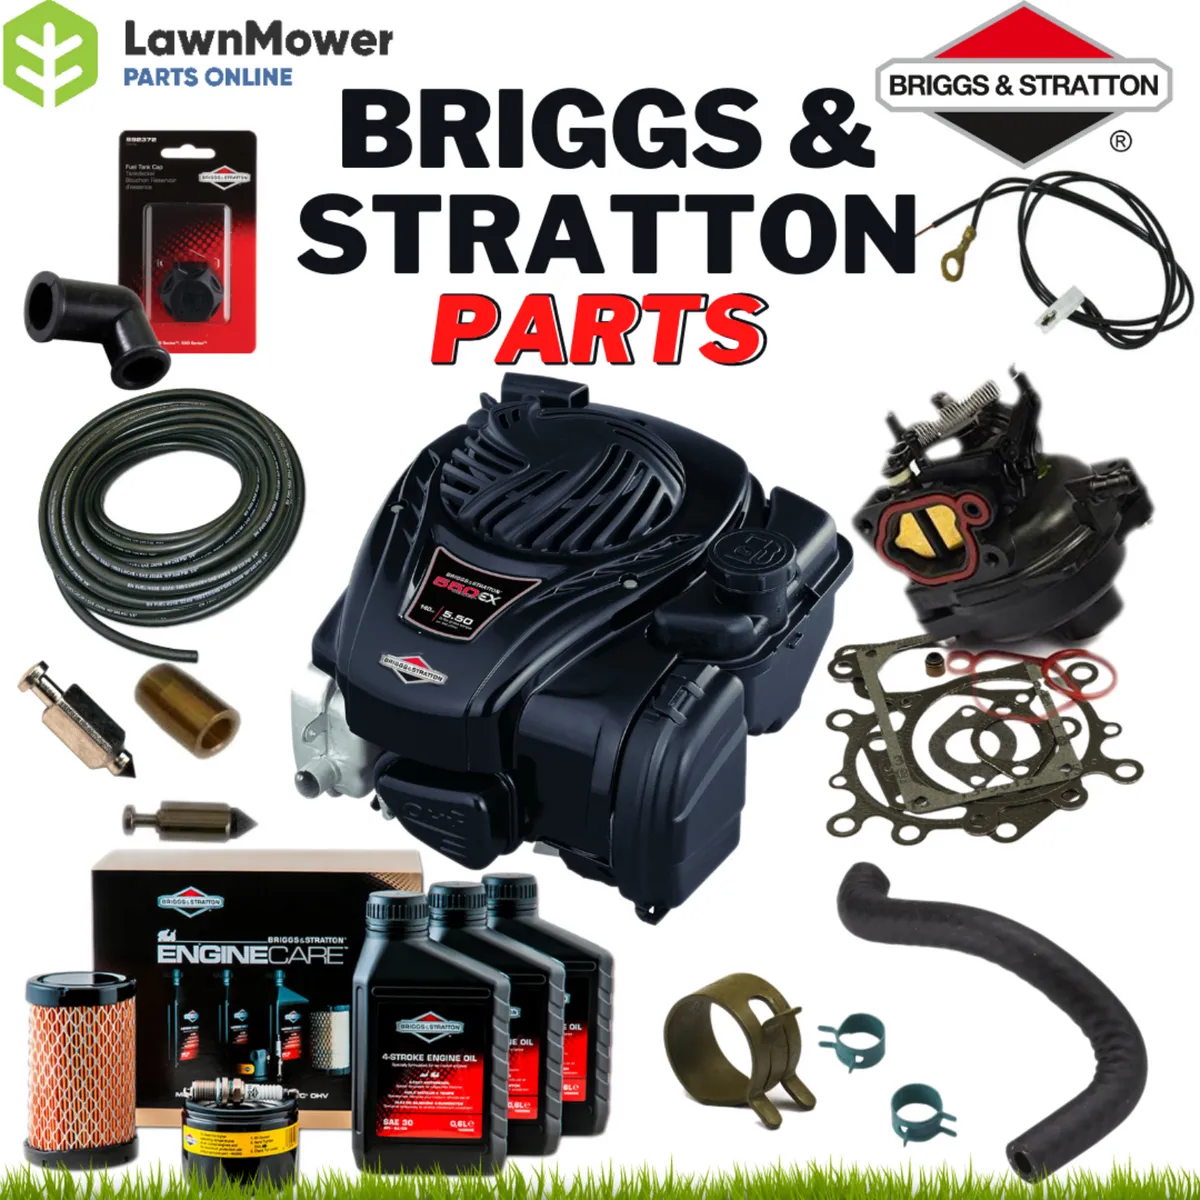 Briggs and Stratton Parts: FREE DELIVERY - Image 1